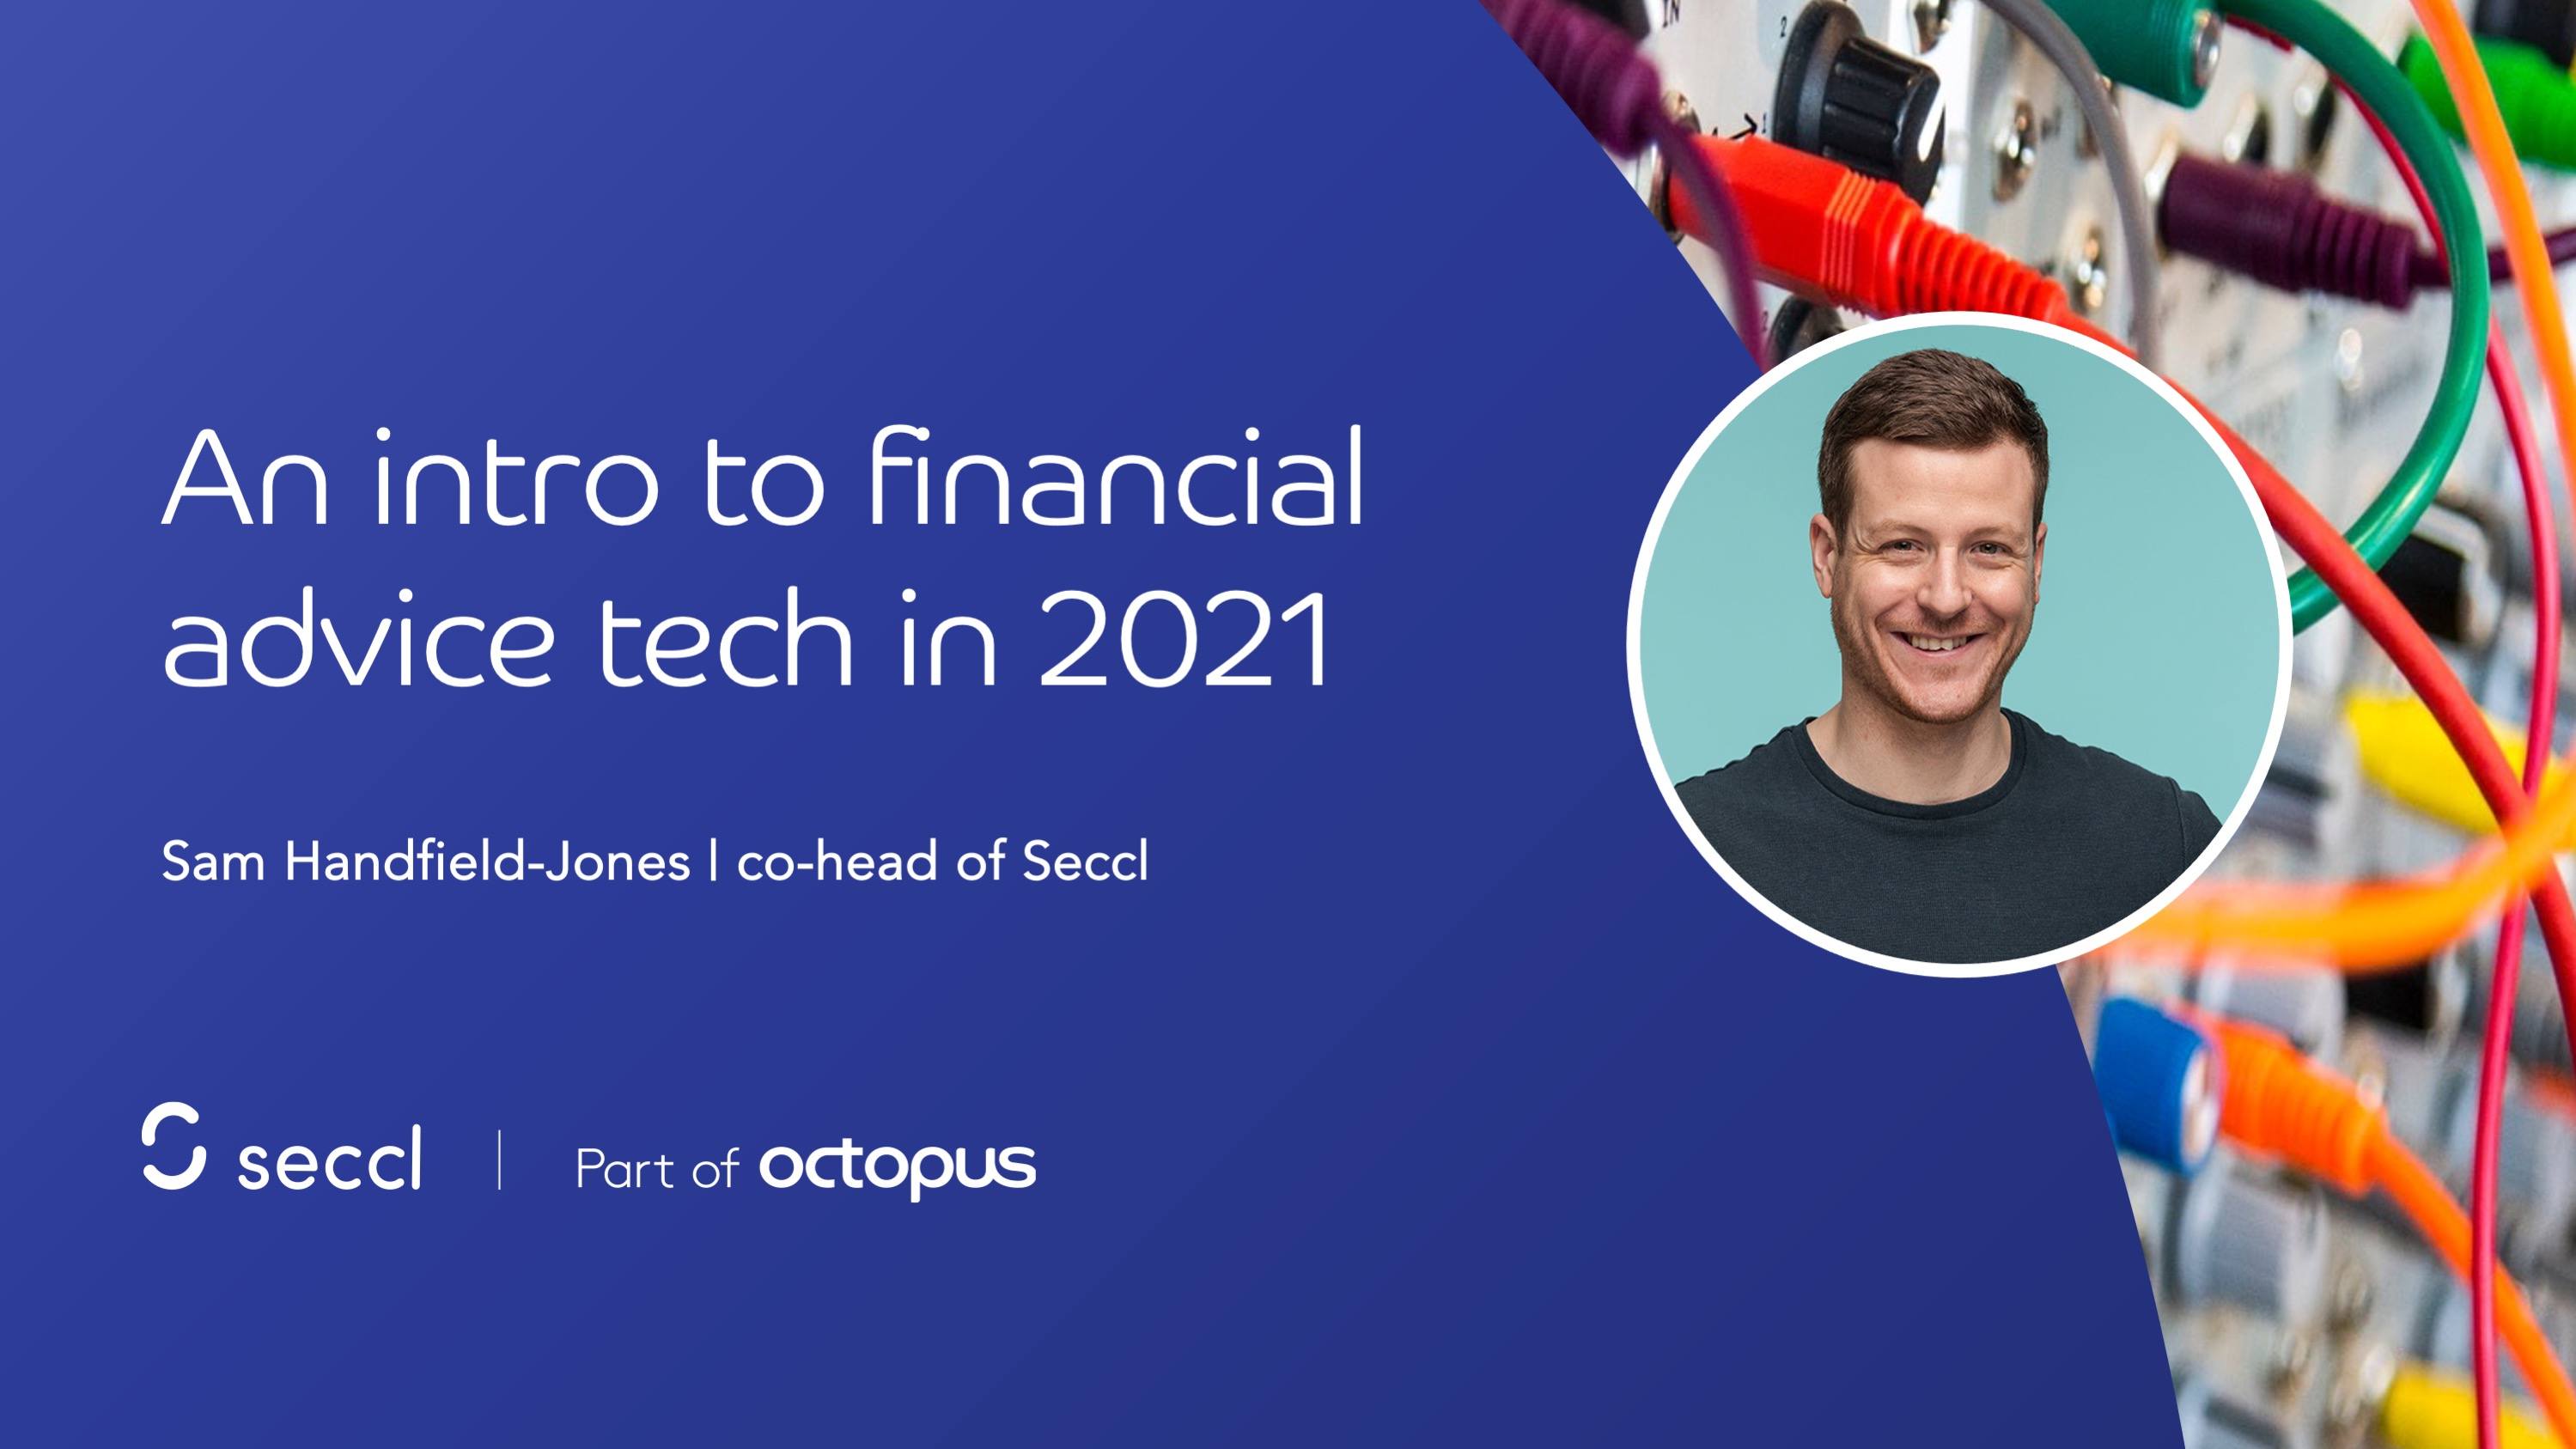 An intro to financial advice tech in 2021